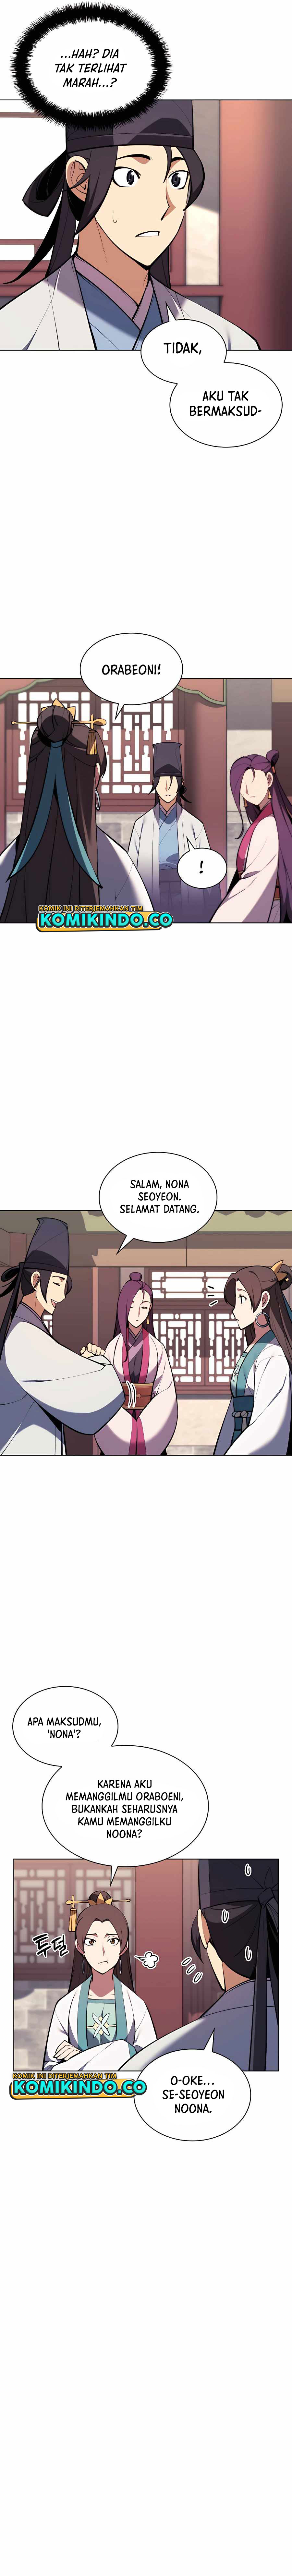 Records of the Swordsman Scholar Chapter 44